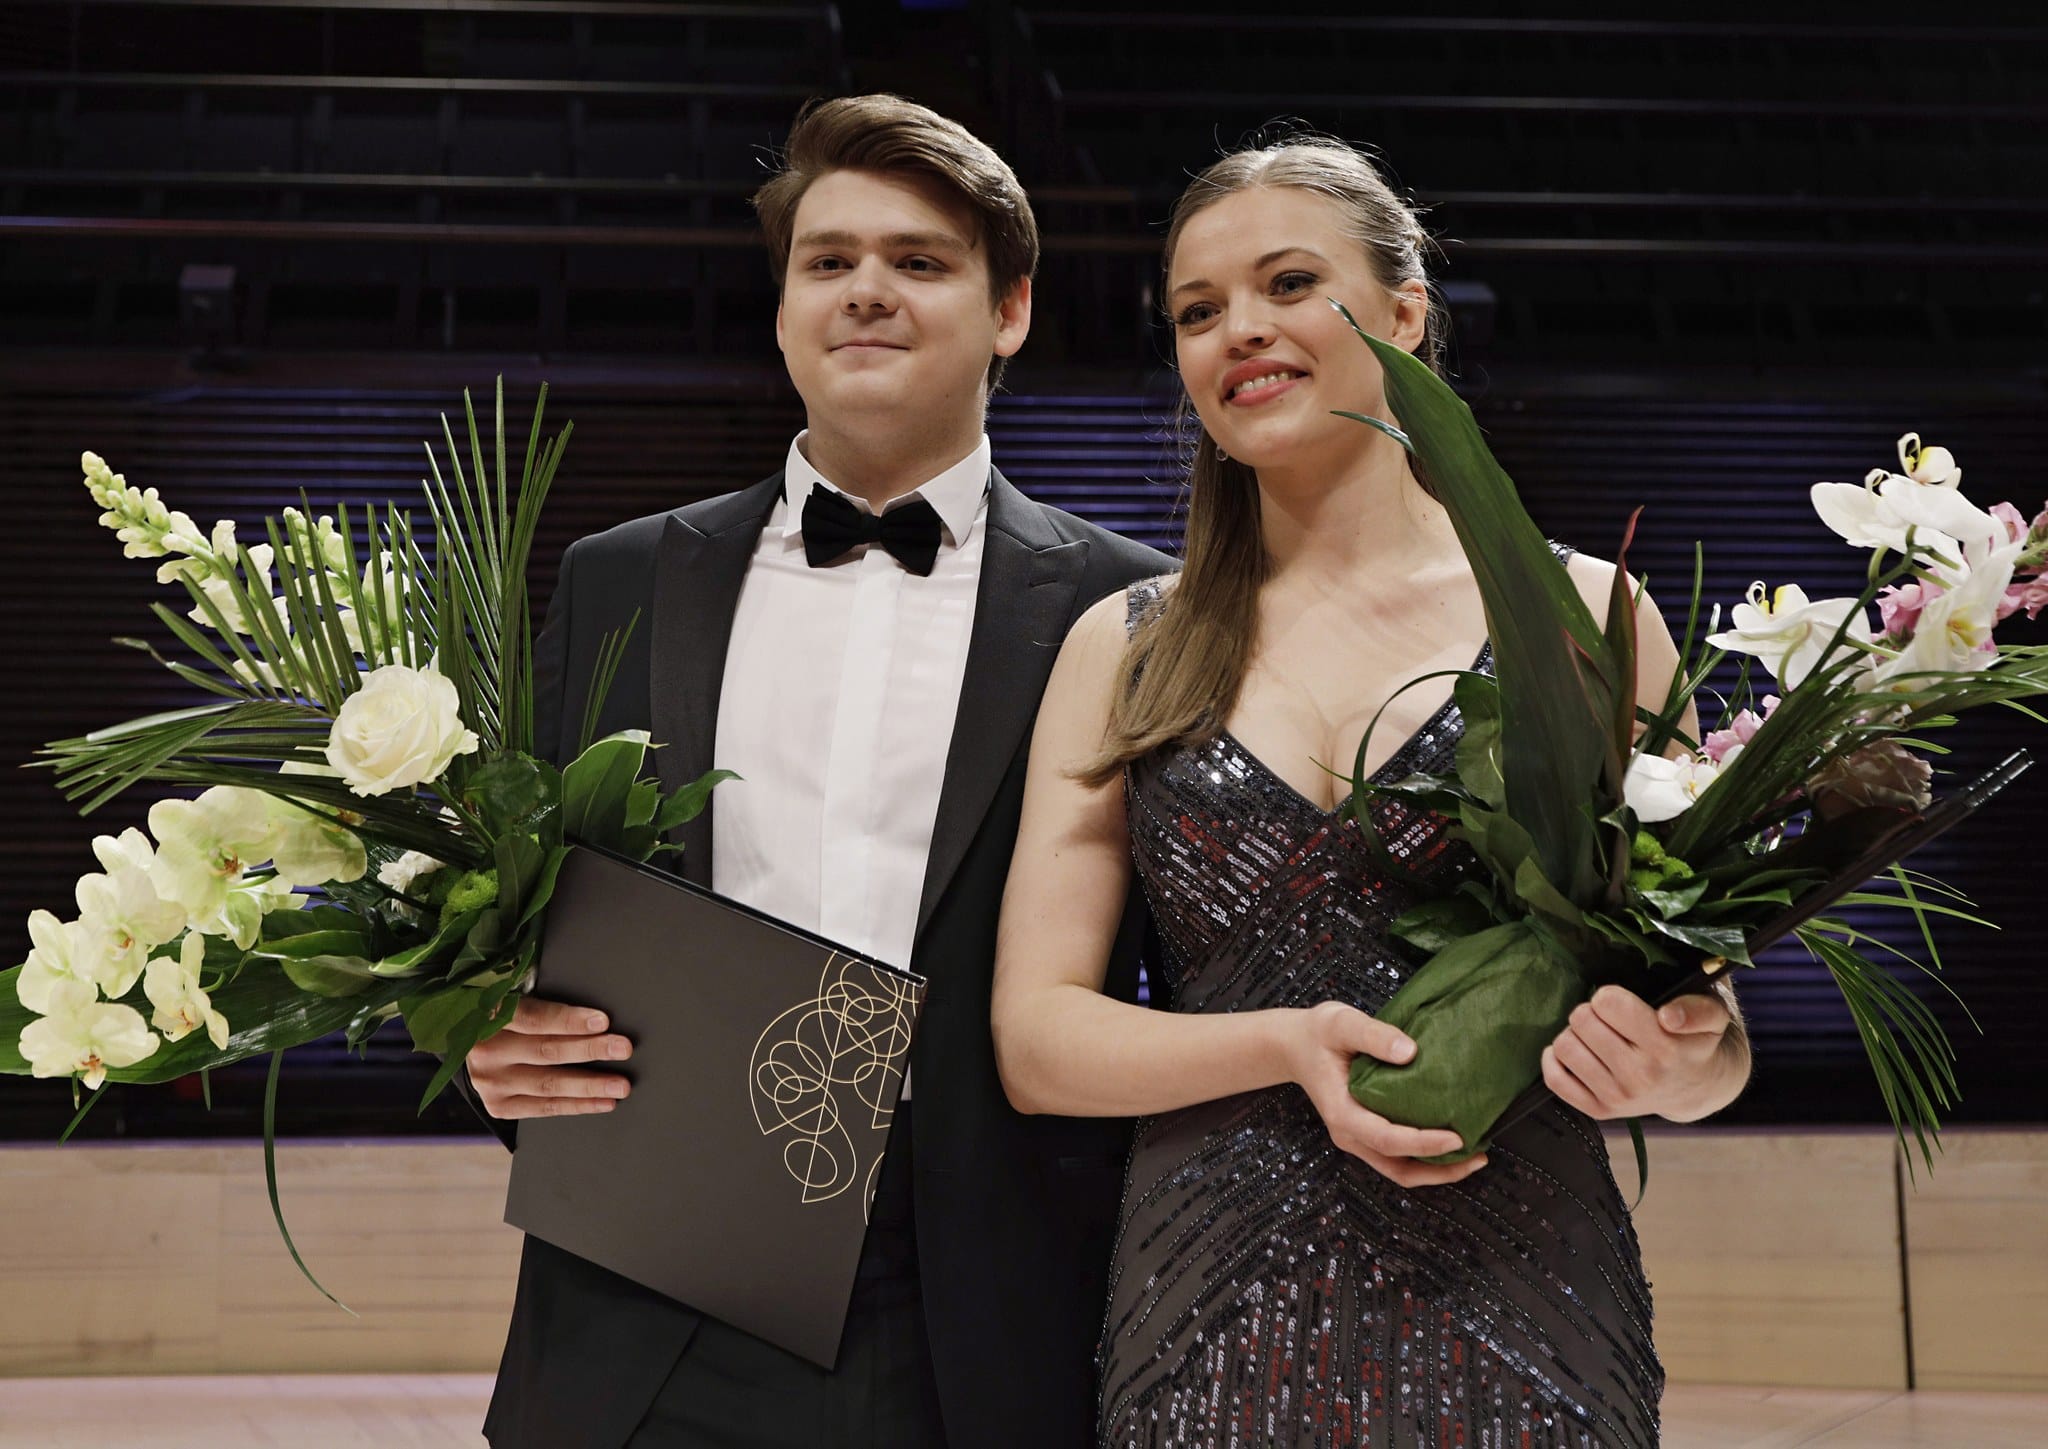 Stefan Astakhov and Johanna Wallroth on Musiikkitalo stage with flower bouquets.